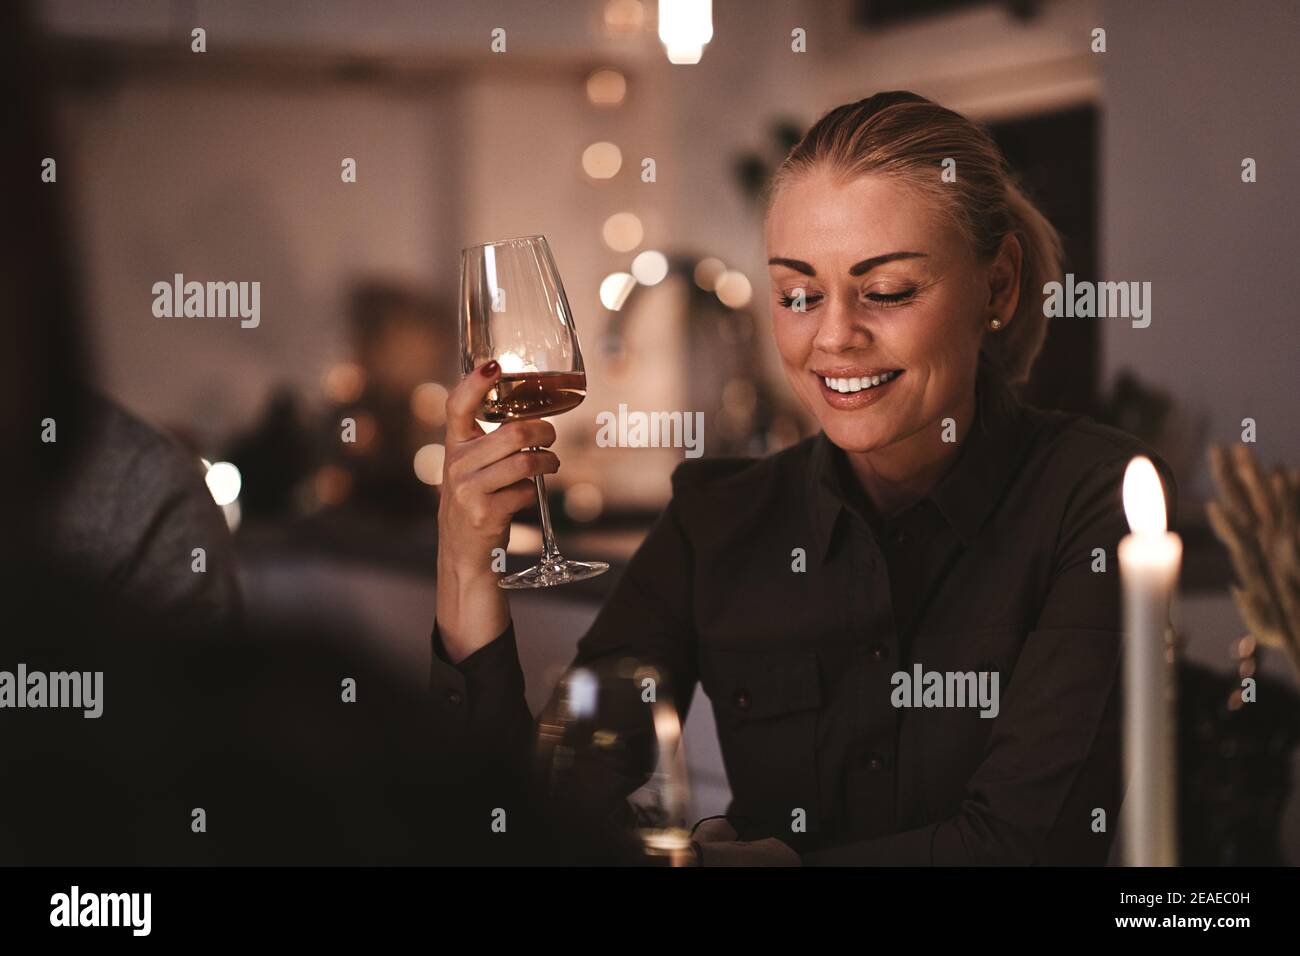 Smiling young woman sitting at a dining room table during a candlelit dinner party drinking wine Stock Photo